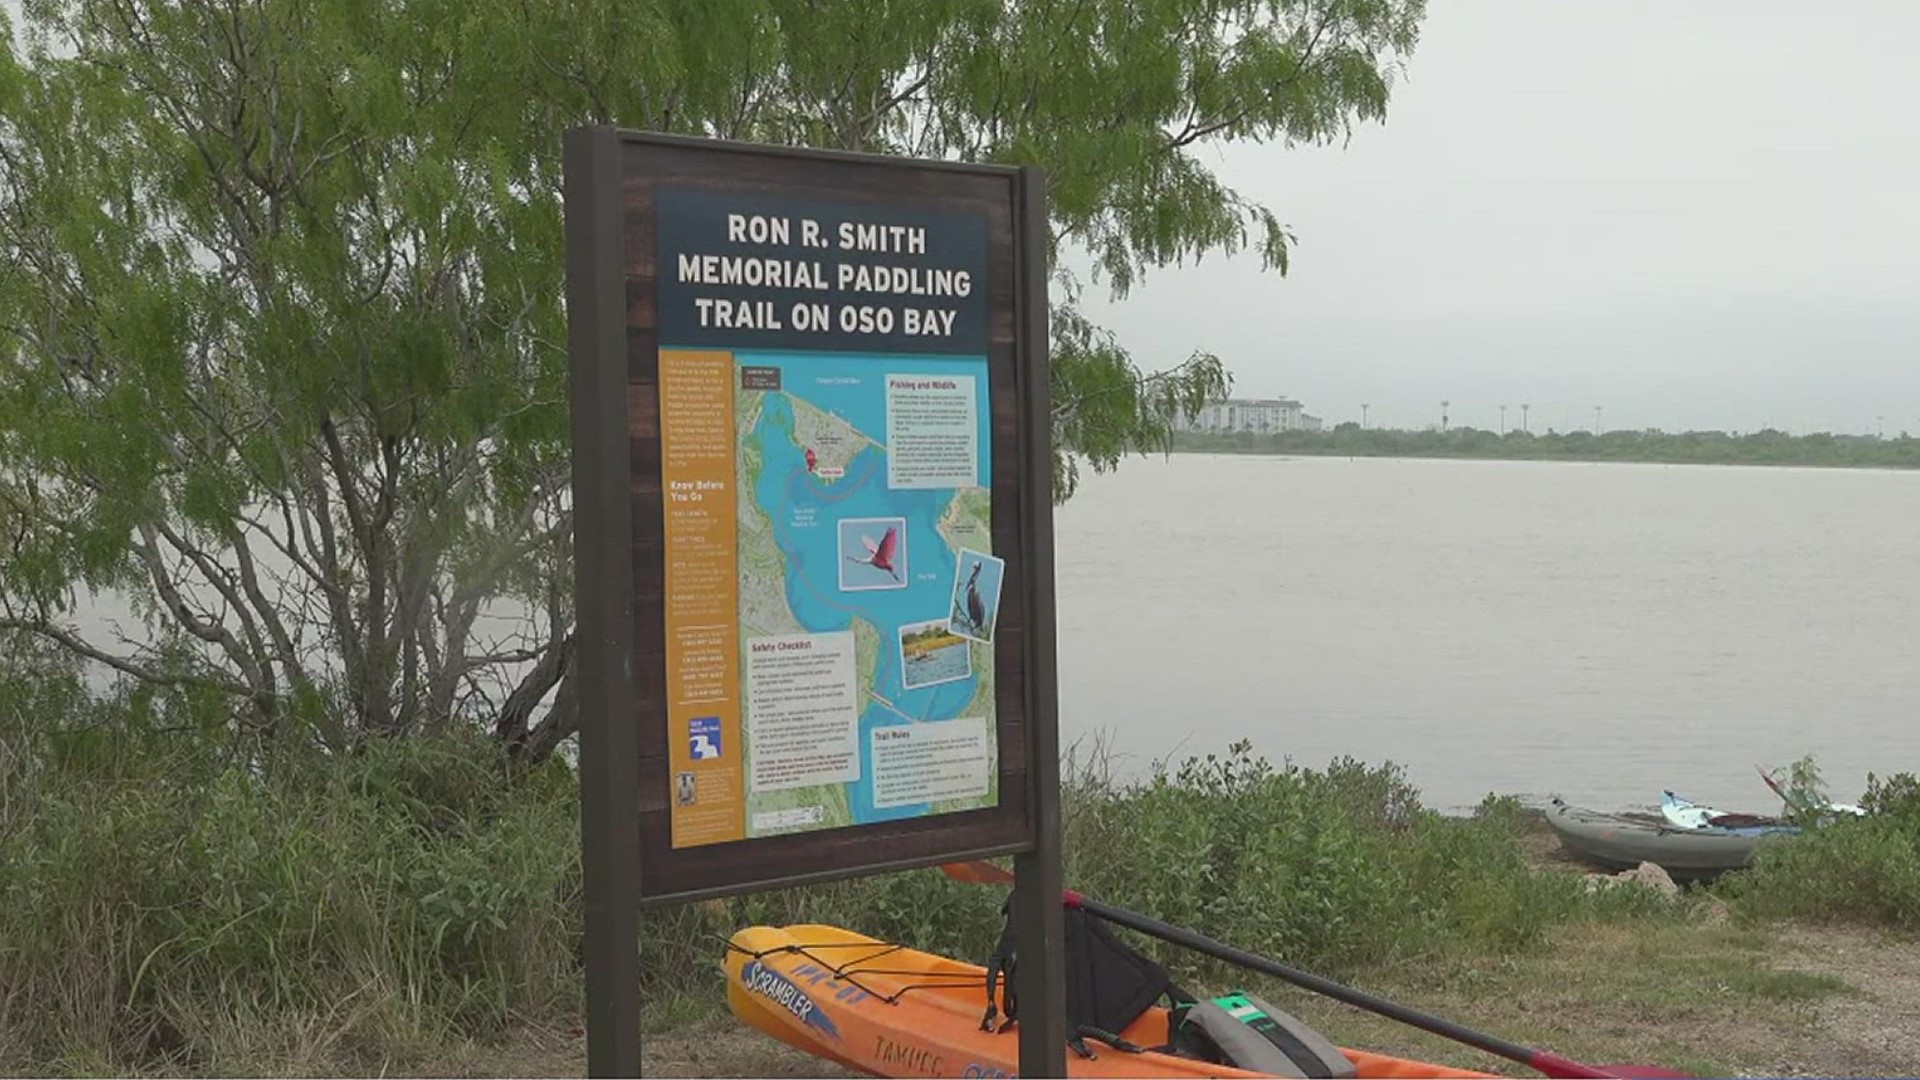 The Ron R. Smith Memorial Paddling Trail is named in honor of TAMUCC alum and Texas Parks and Wildlife biologist who helped create other trails.